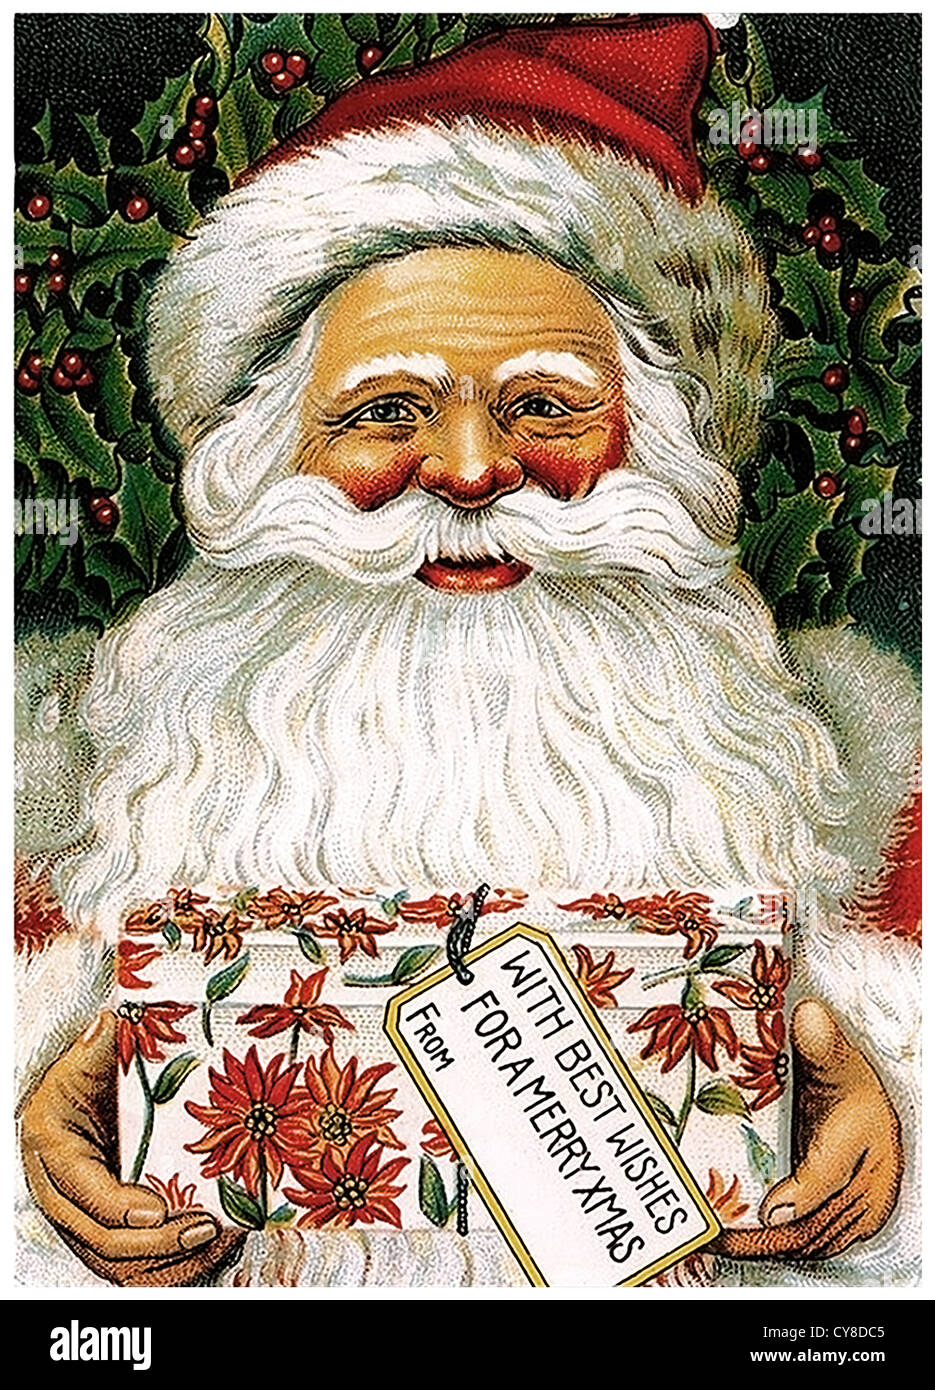 Santa Claus with gift Stock Photo